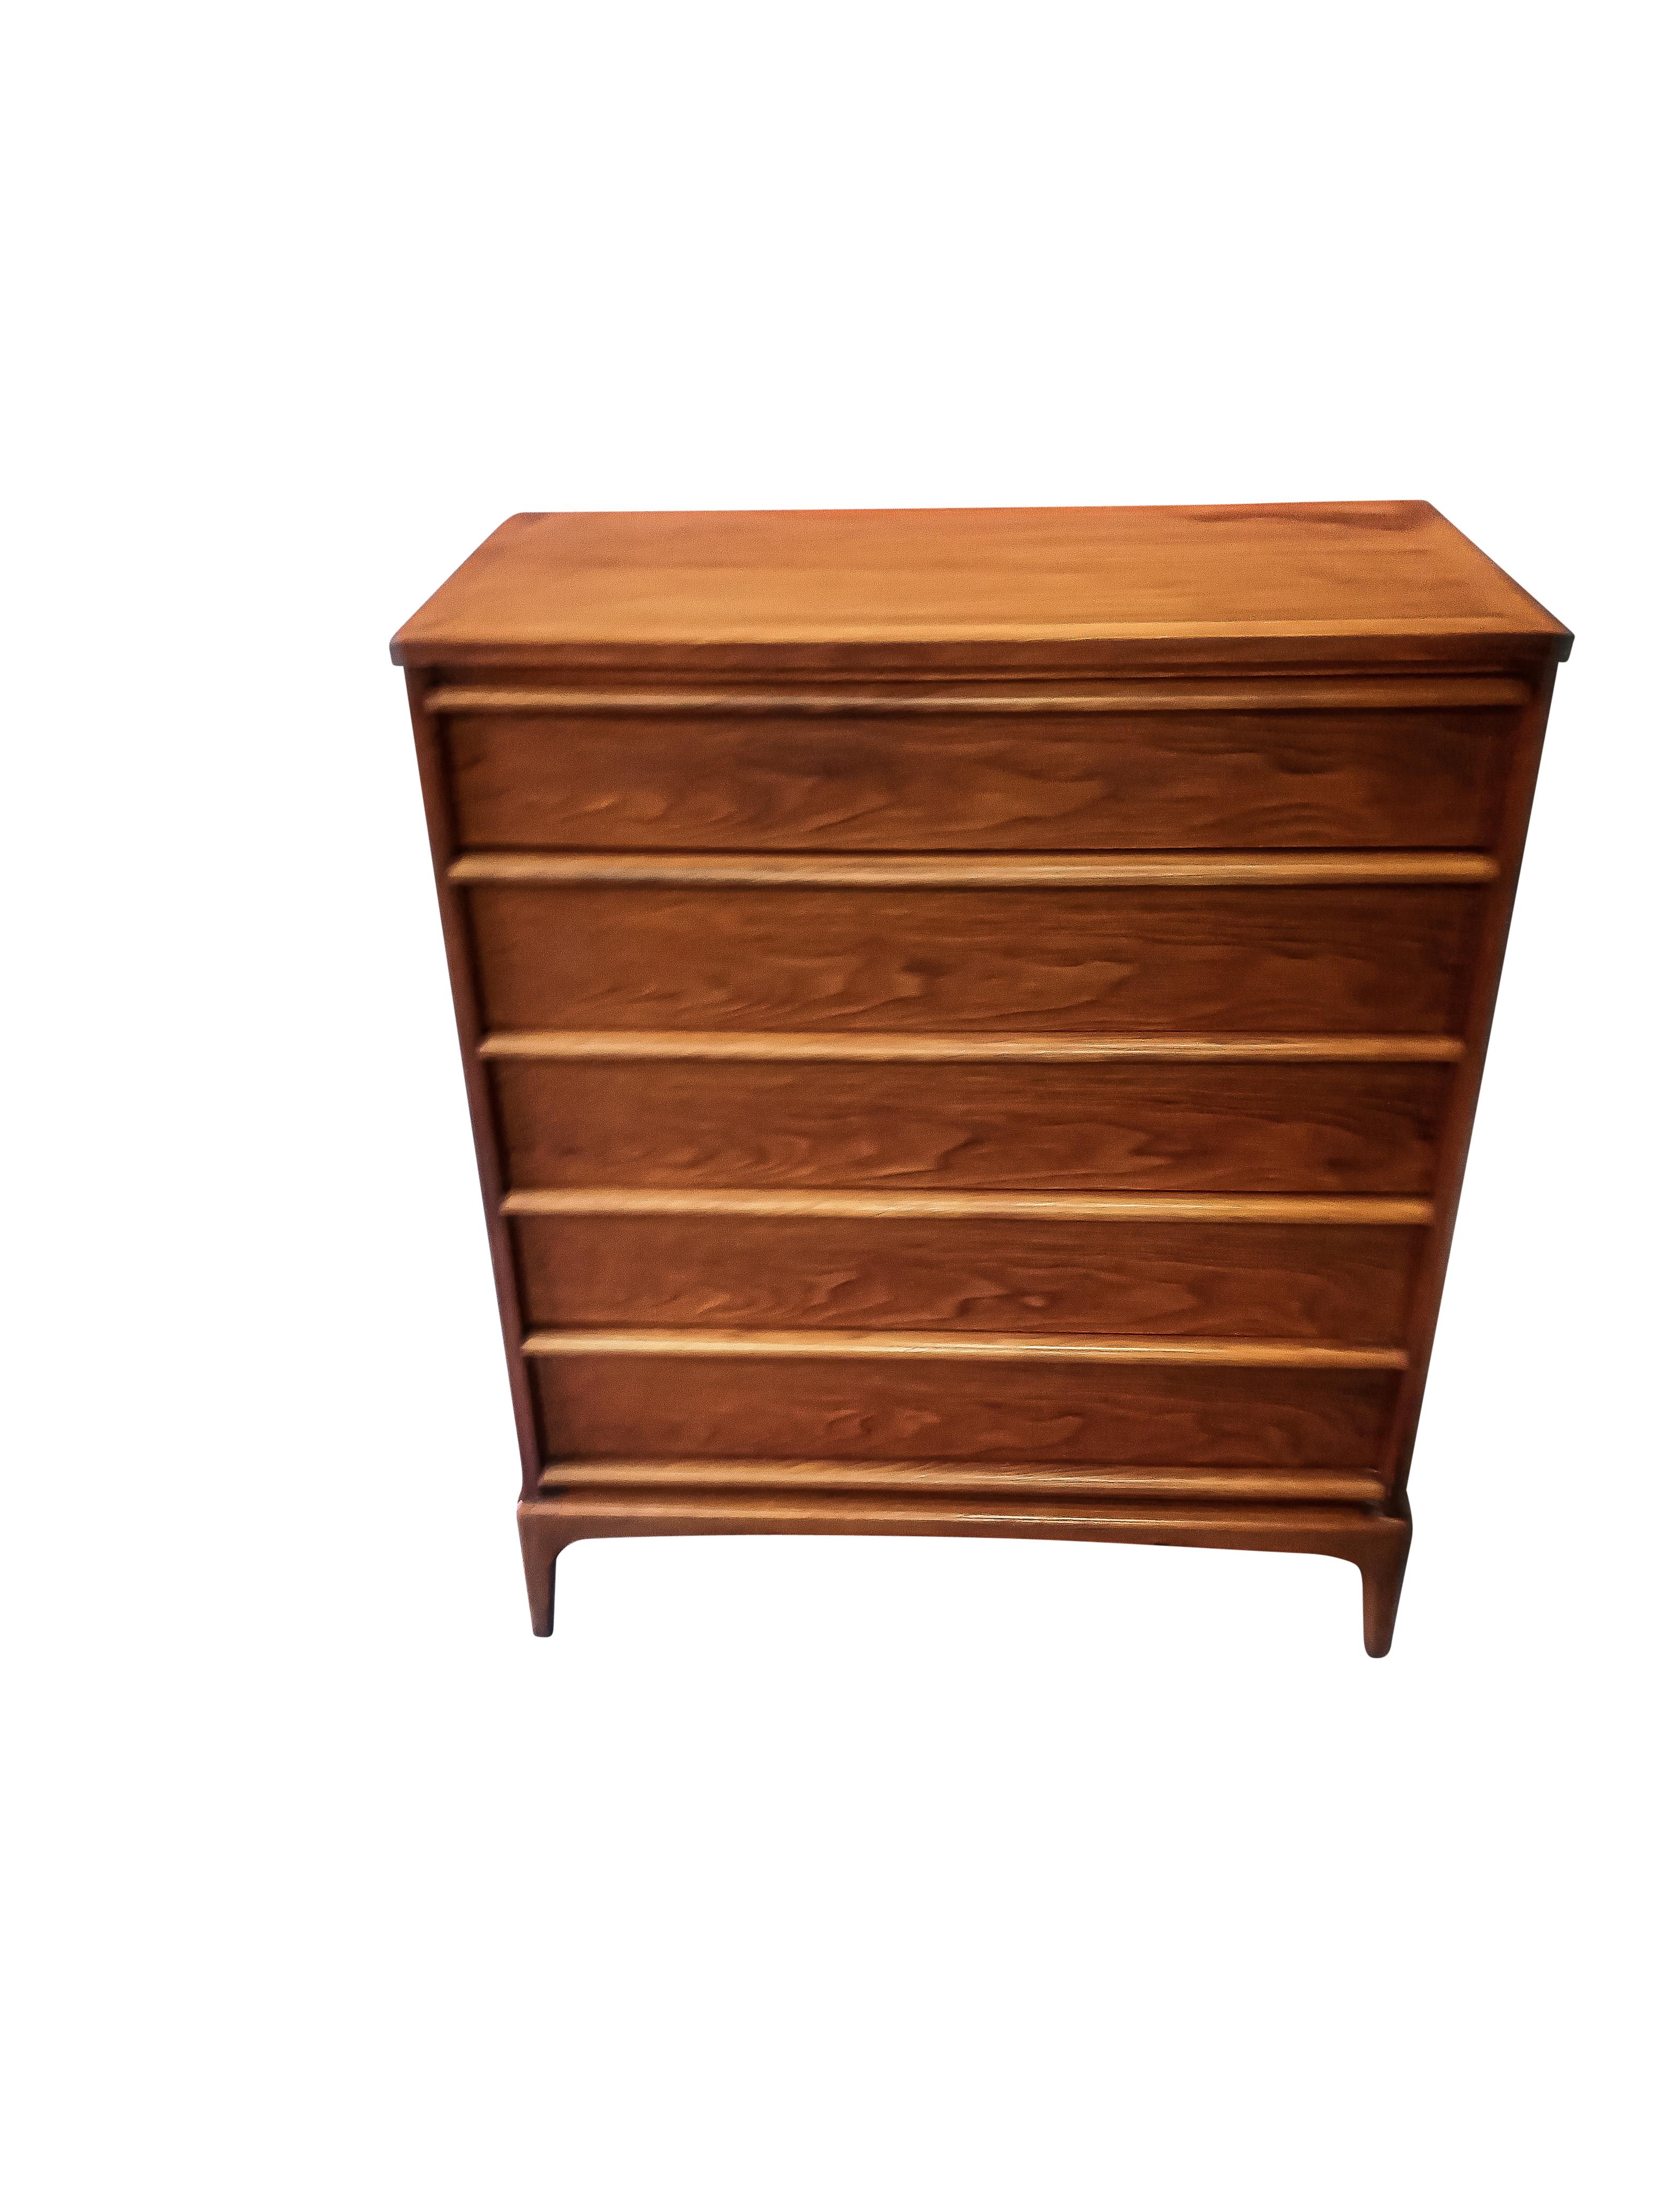 An American Mid-Century walnut dresser from the 